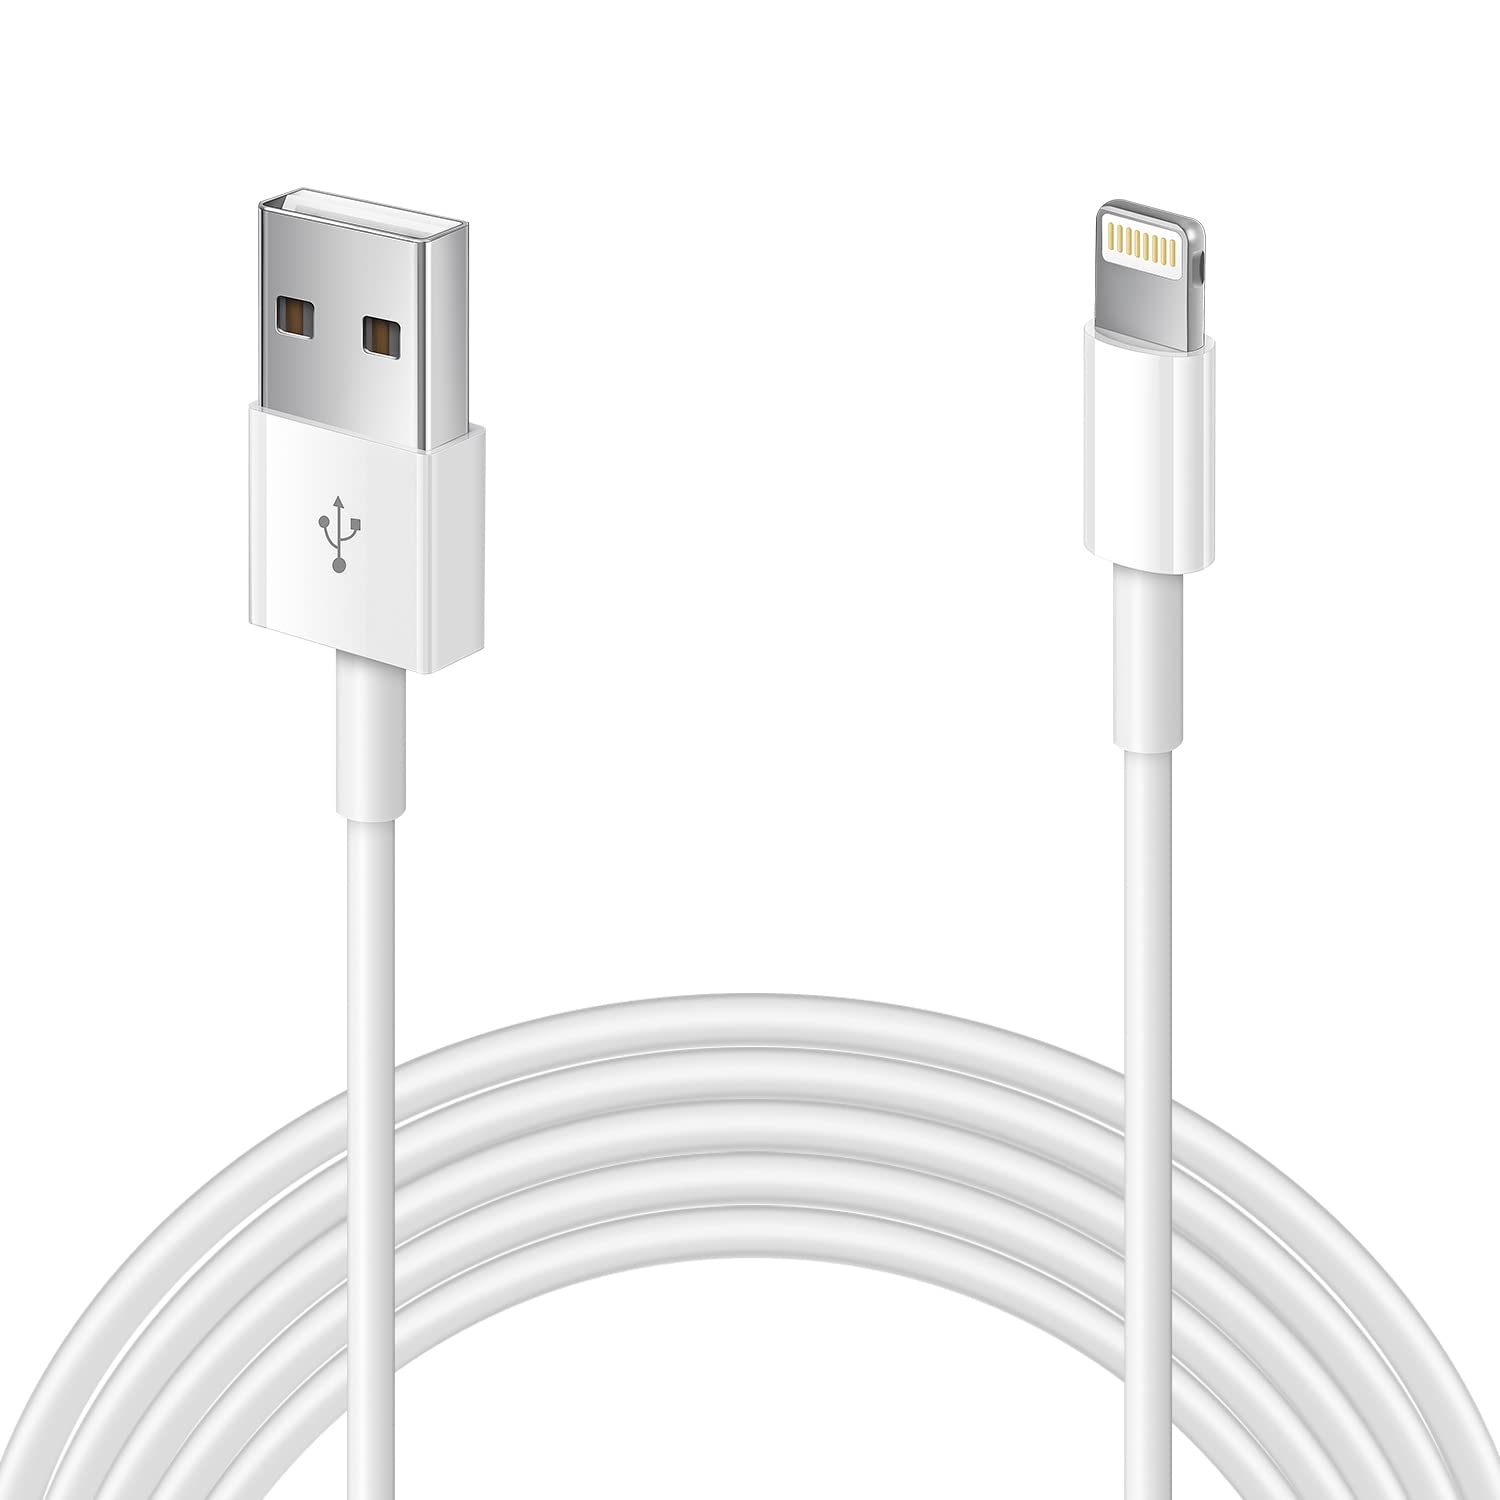 (C/S)[Apple MFi Certified] iPhone/iPad Charging/Charger Cord Lightening to USB Cable Fast Charging and Syncing for iPads,iPods and iPhone X/8/7/6s/6/plus/5s/5c/SE (FREE SHIPPING)